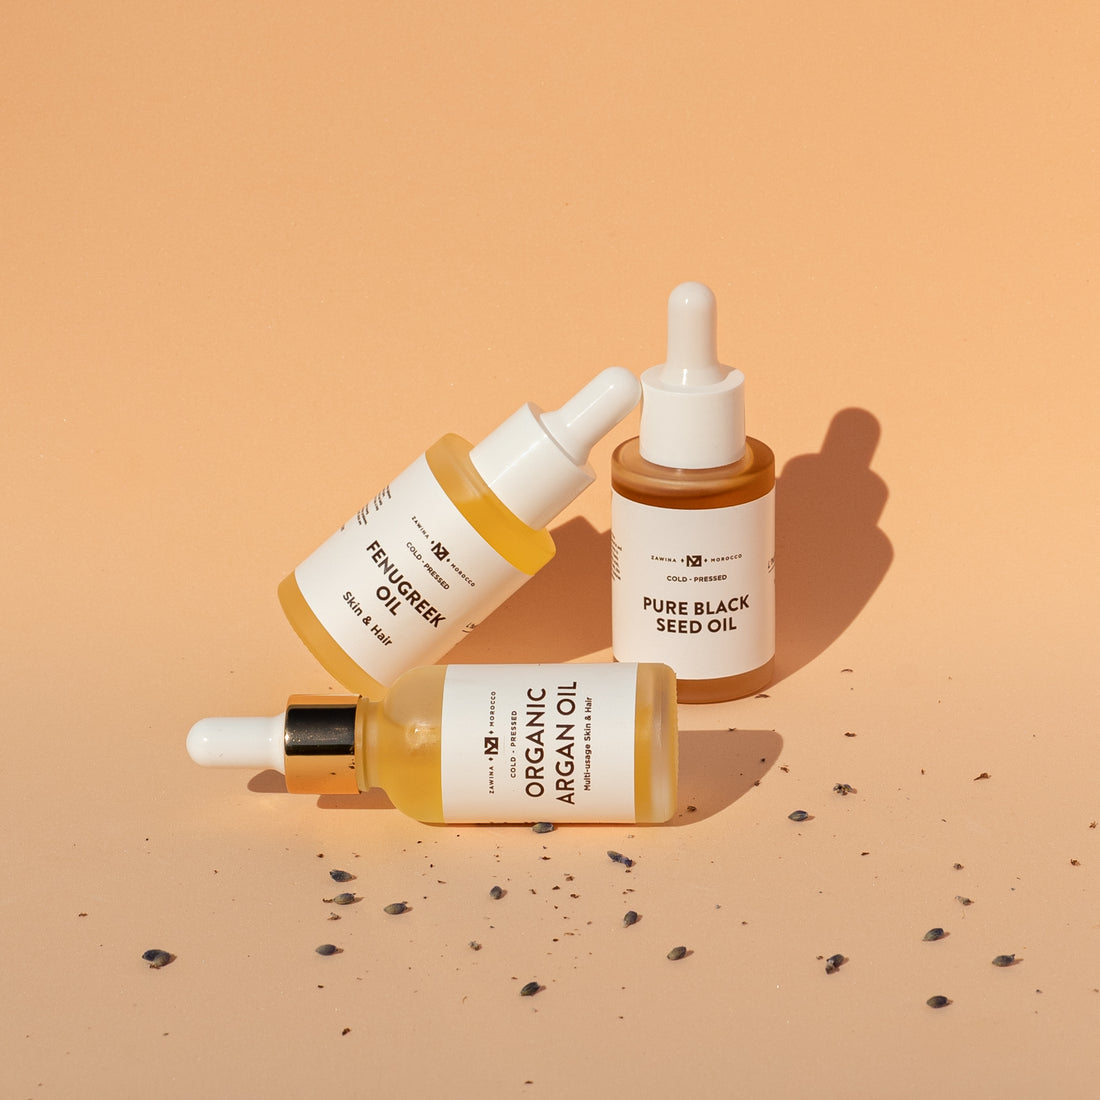 Refined vs. Unrefined Face Oil: What's the Difference?